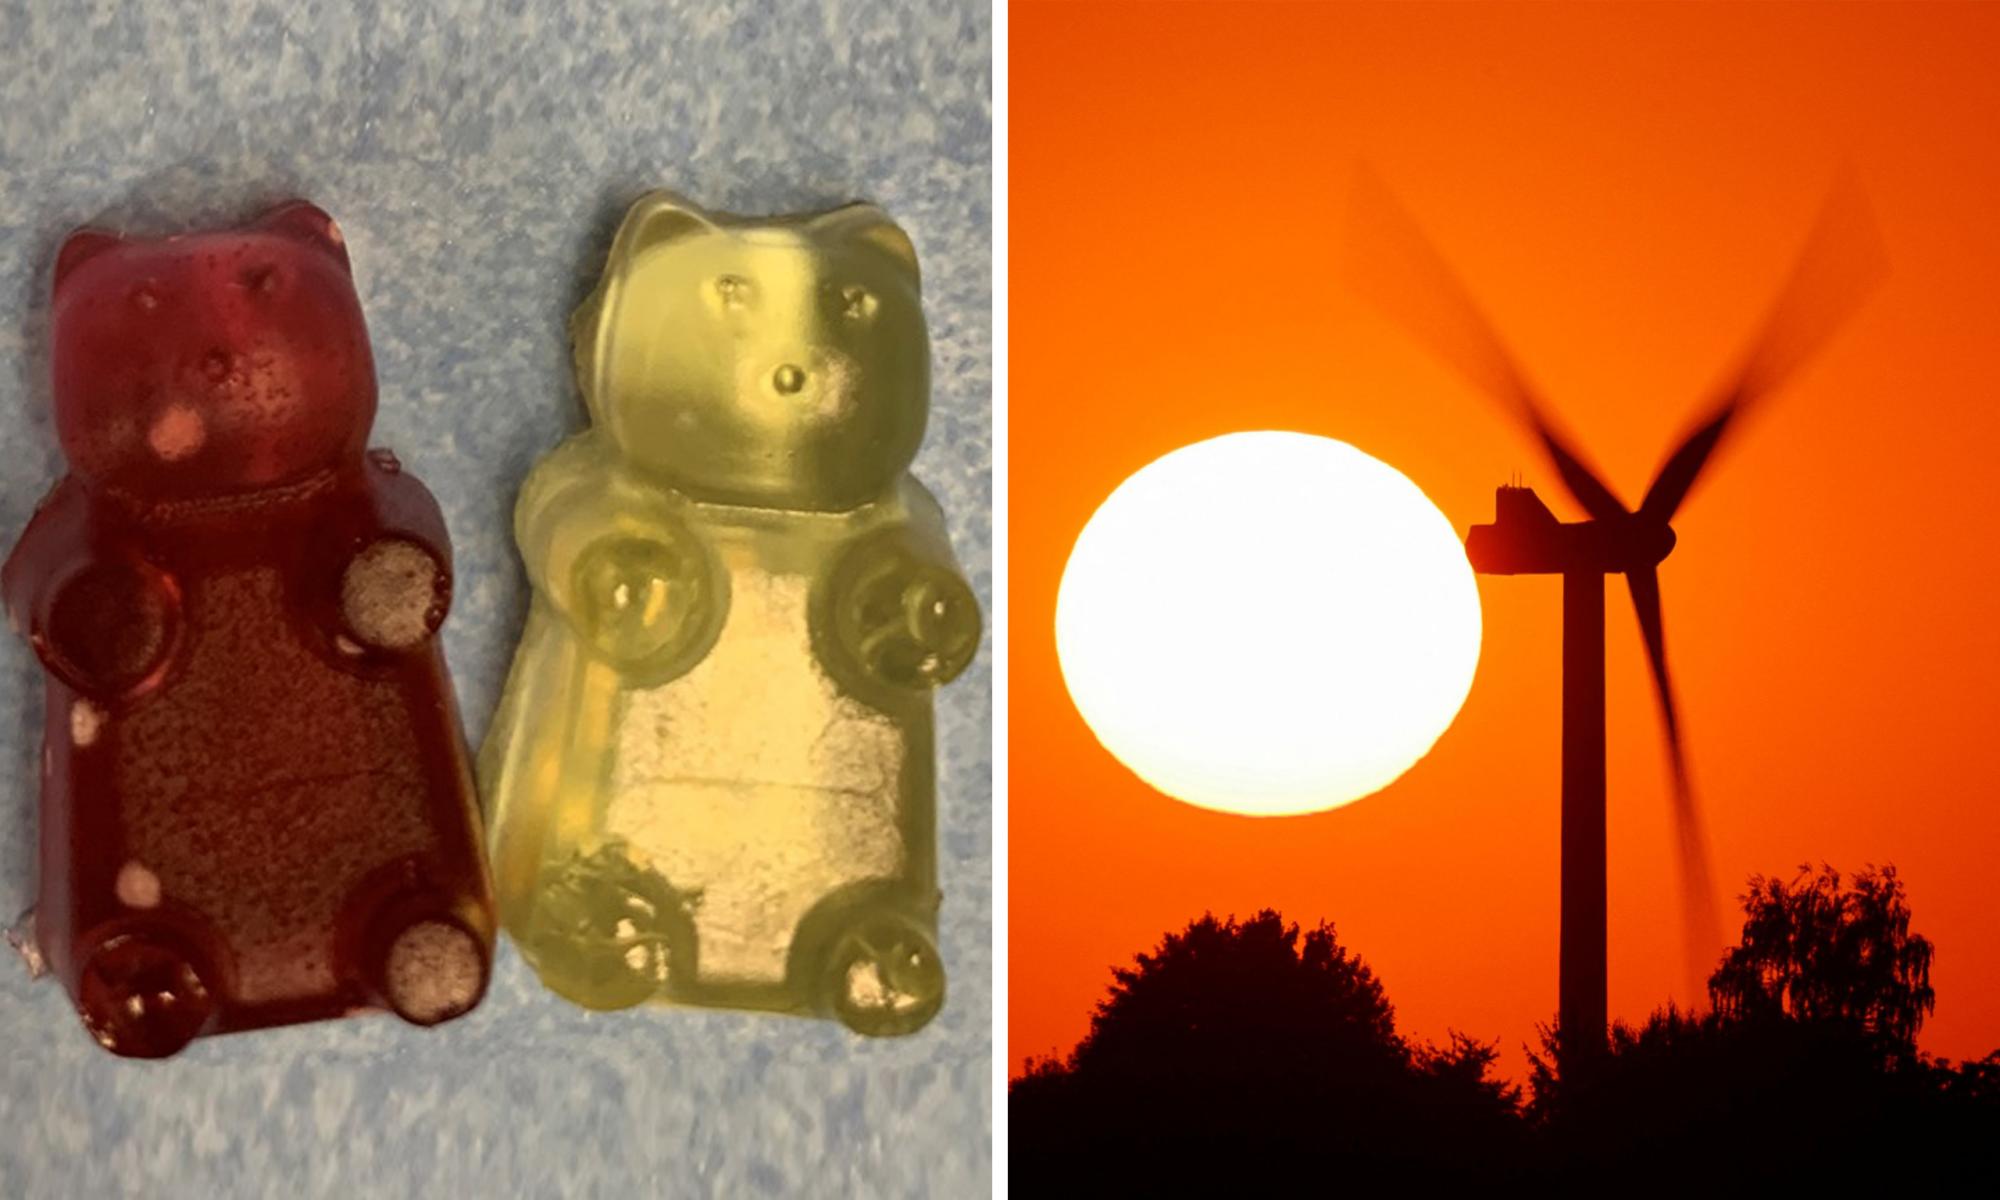 Wind turbine blades could be recycled into gummy bears, scientists say